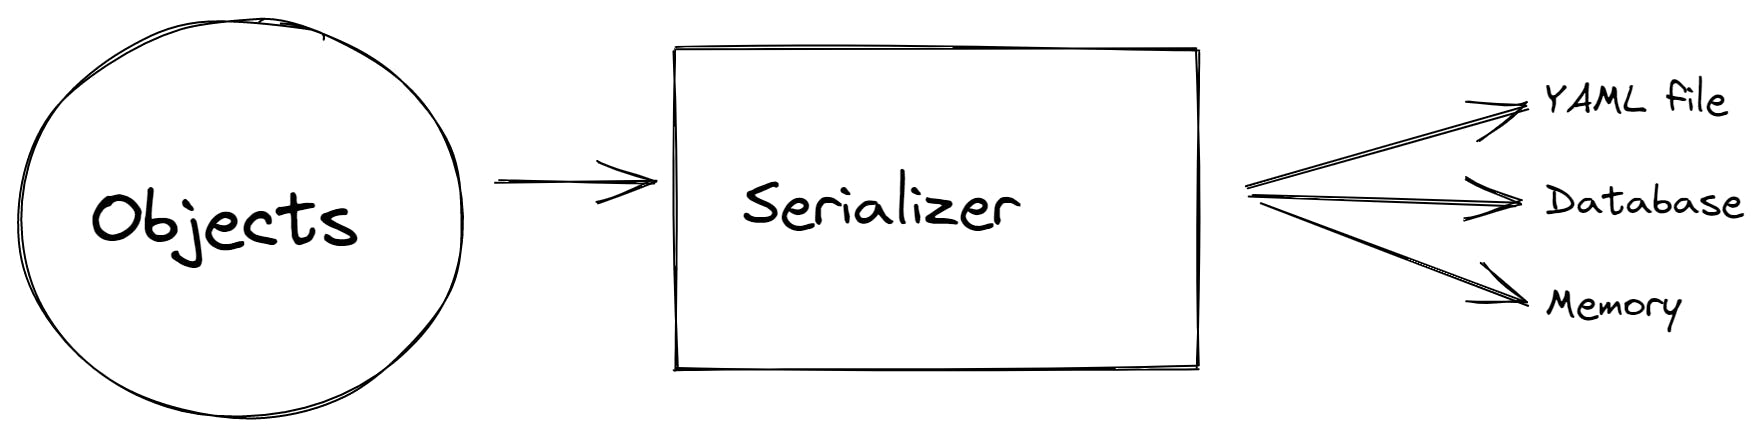 serializer.png